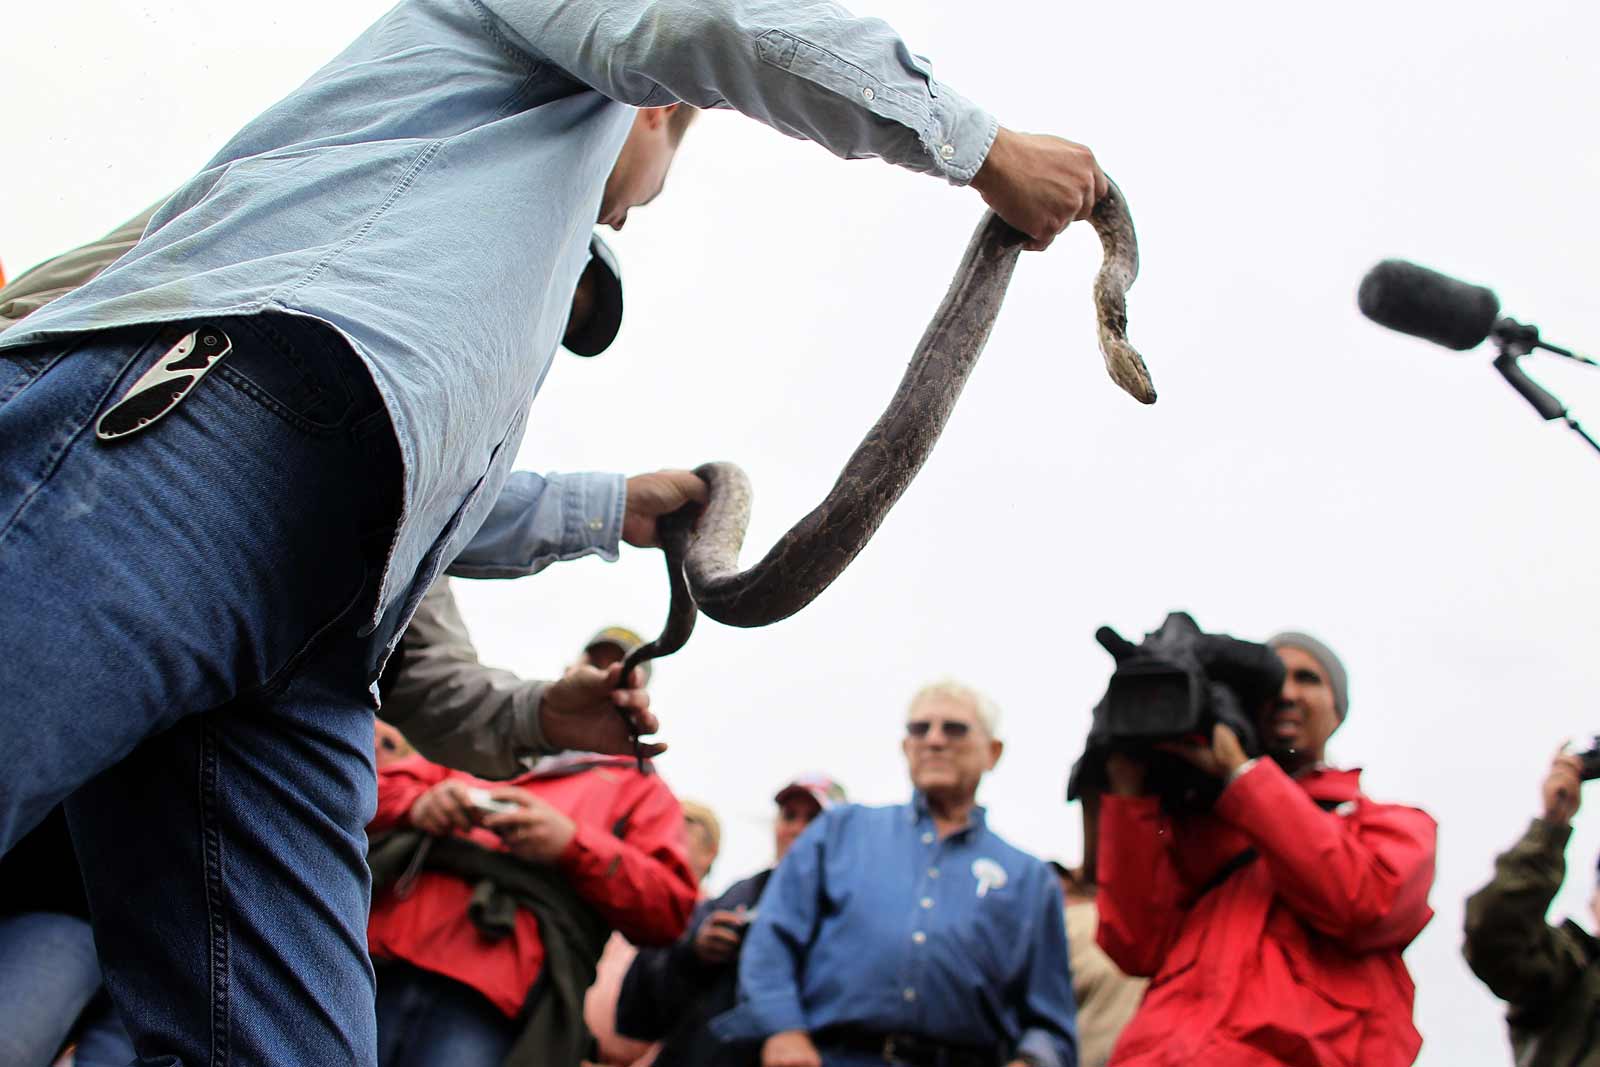 Hunter Michael Cole holding a Burmese Python during a nonnative snake hunt training session for capturing reptiles that are thought to be damaging the region's endangered wildlife, Miami, February 22, 2010